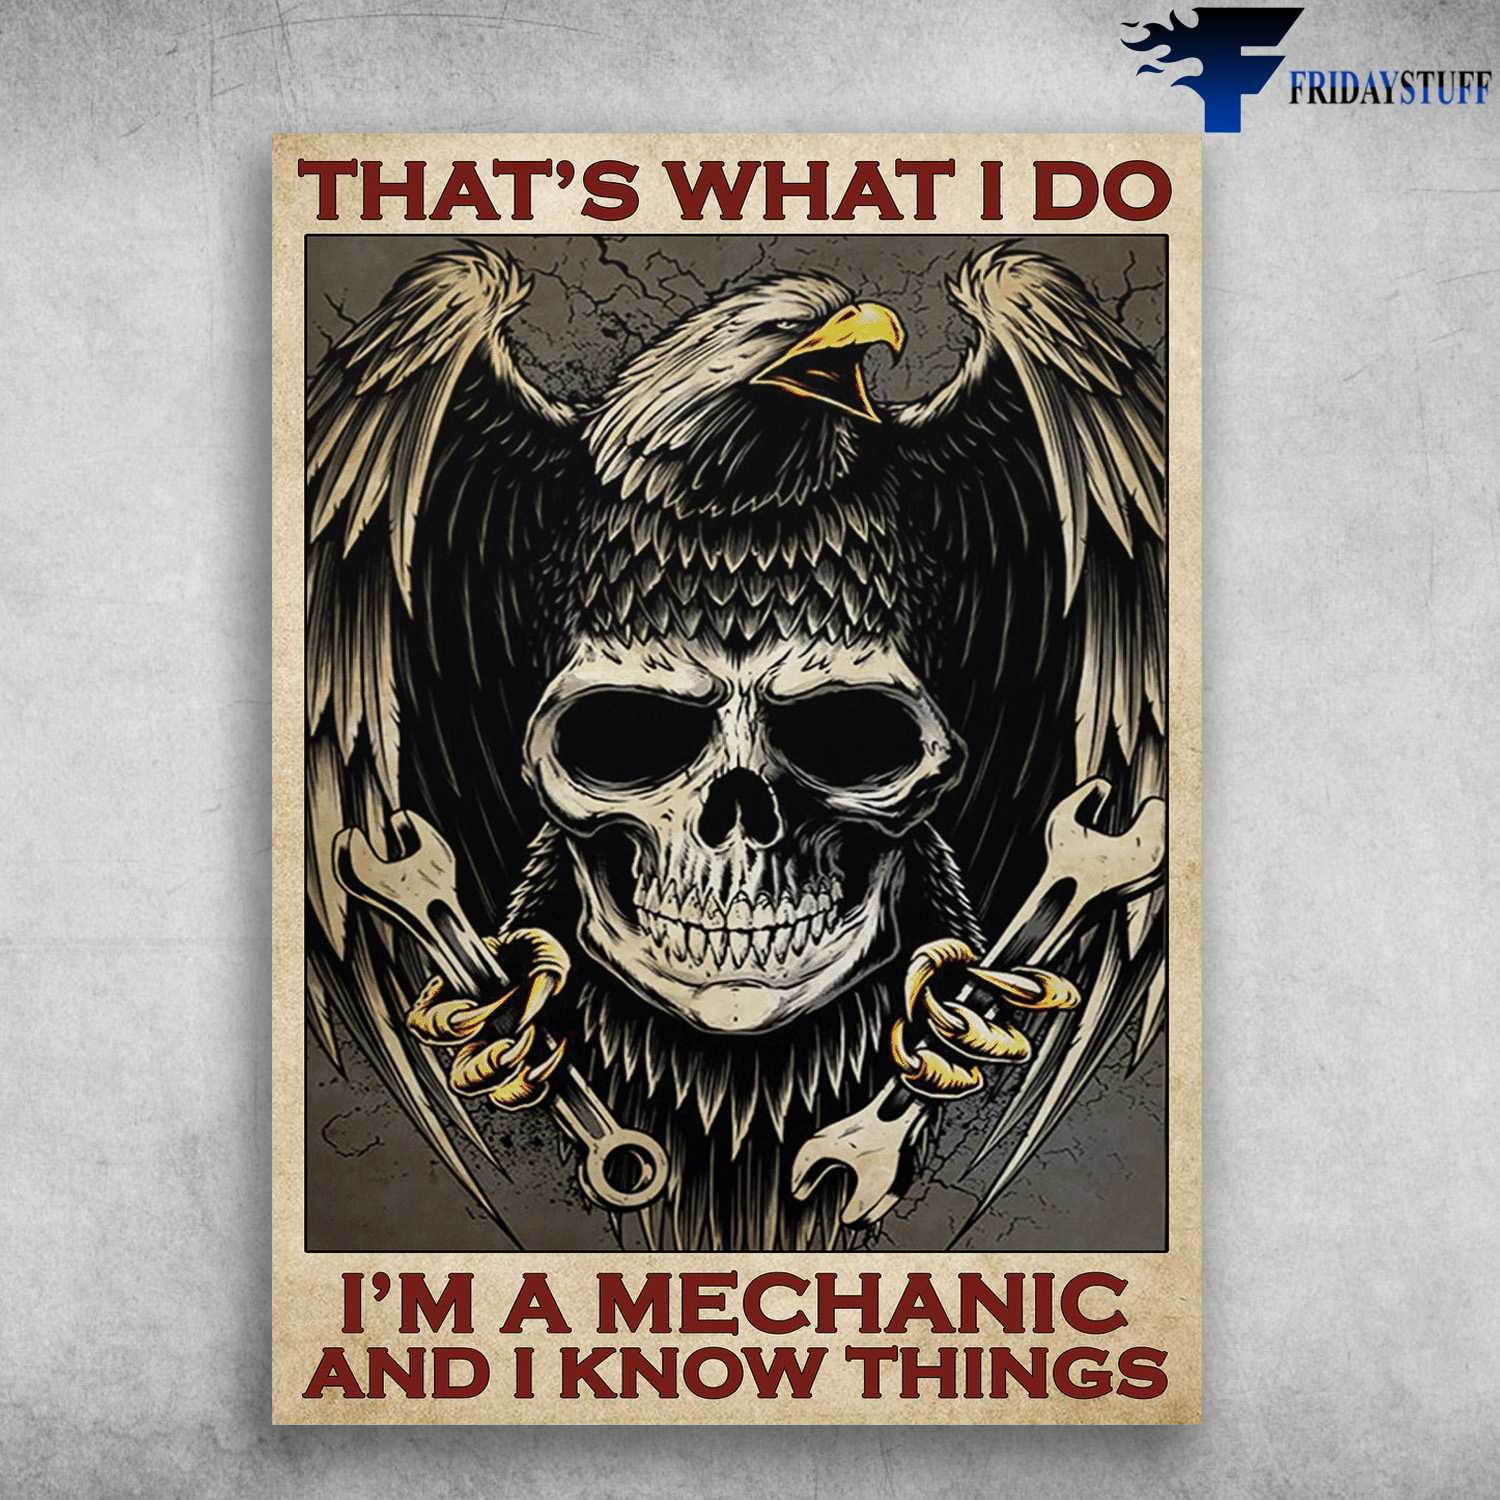 Mechanic Skull Eagle - That's What I Do, I'm A Machanic, And I Know Things